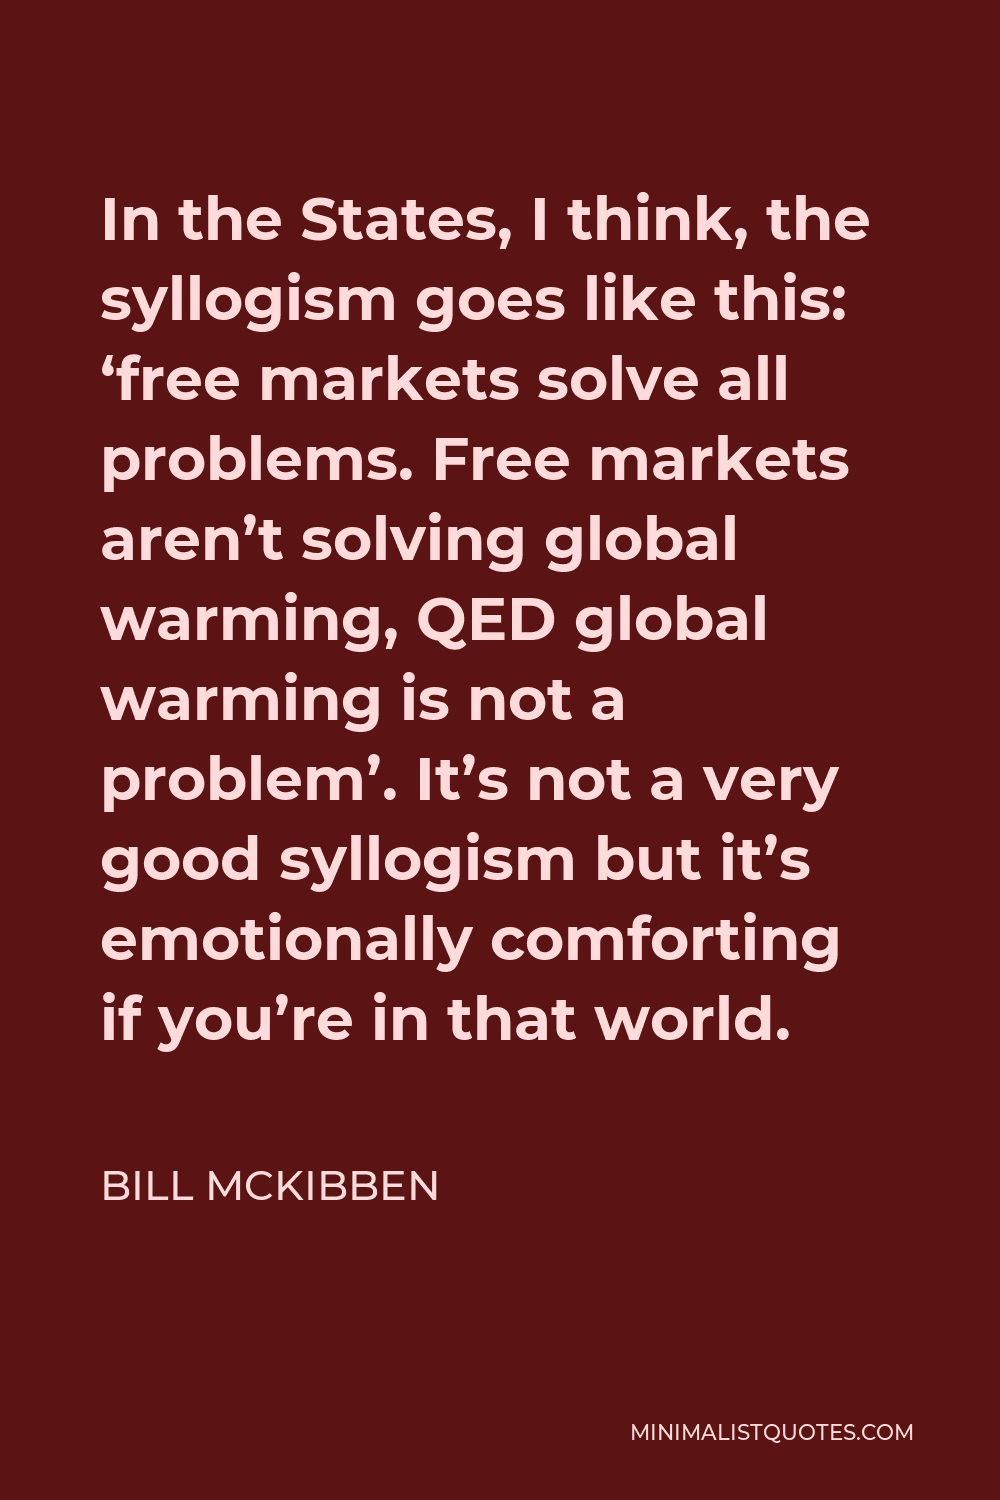 Bill McKibben Quote - In the States, I think, the syllogism goes like this: ‘free markets solve all problems. Free markets aren’t solving global warming, QED global warming is not a problem’. It’s not a very good syllogism but it’s emotionally comforting if you’re in that world.